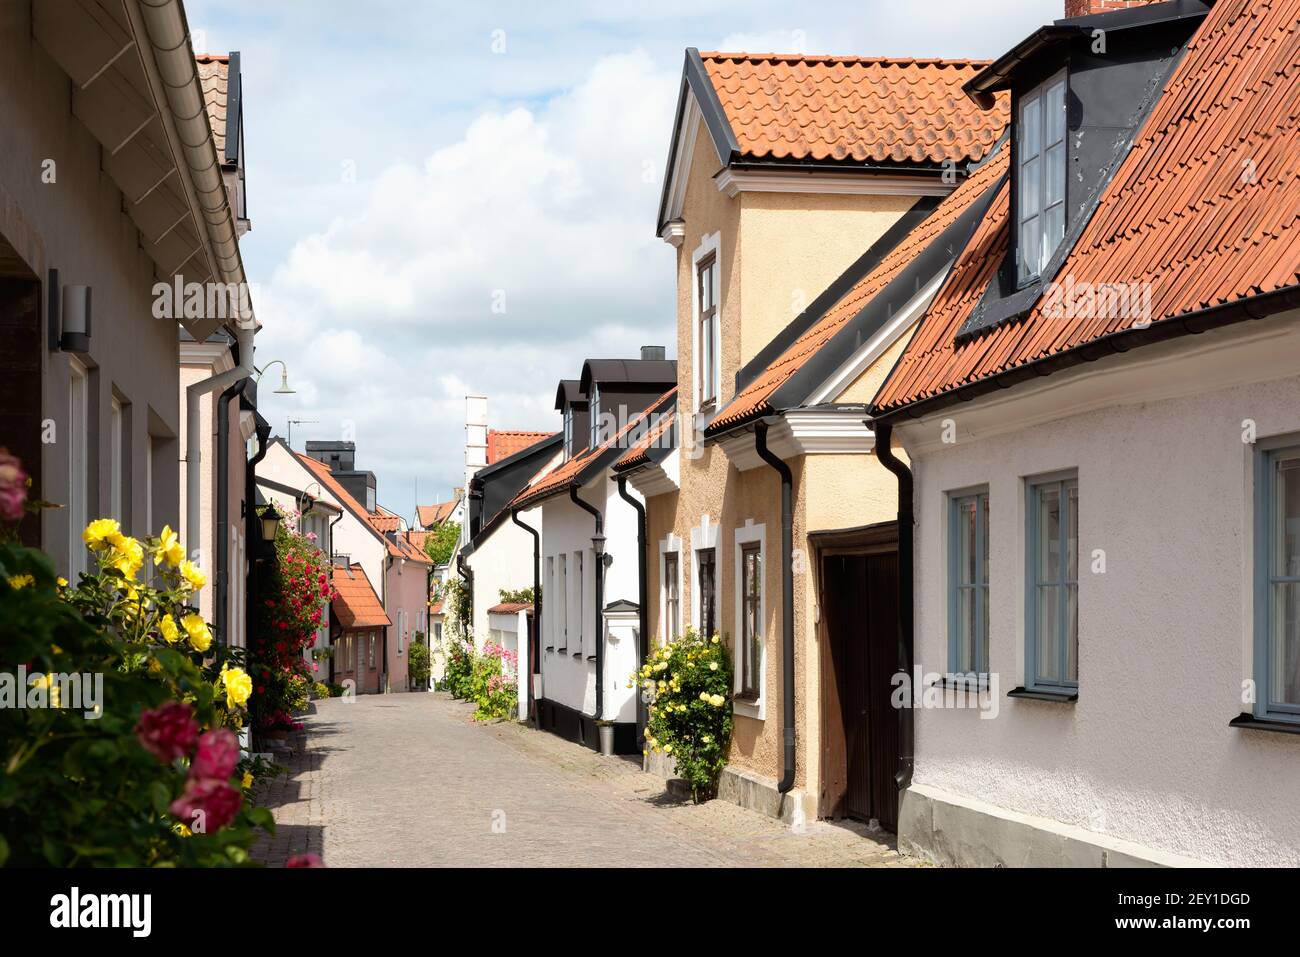 In the old town of Visby, Sweden Stock Photo